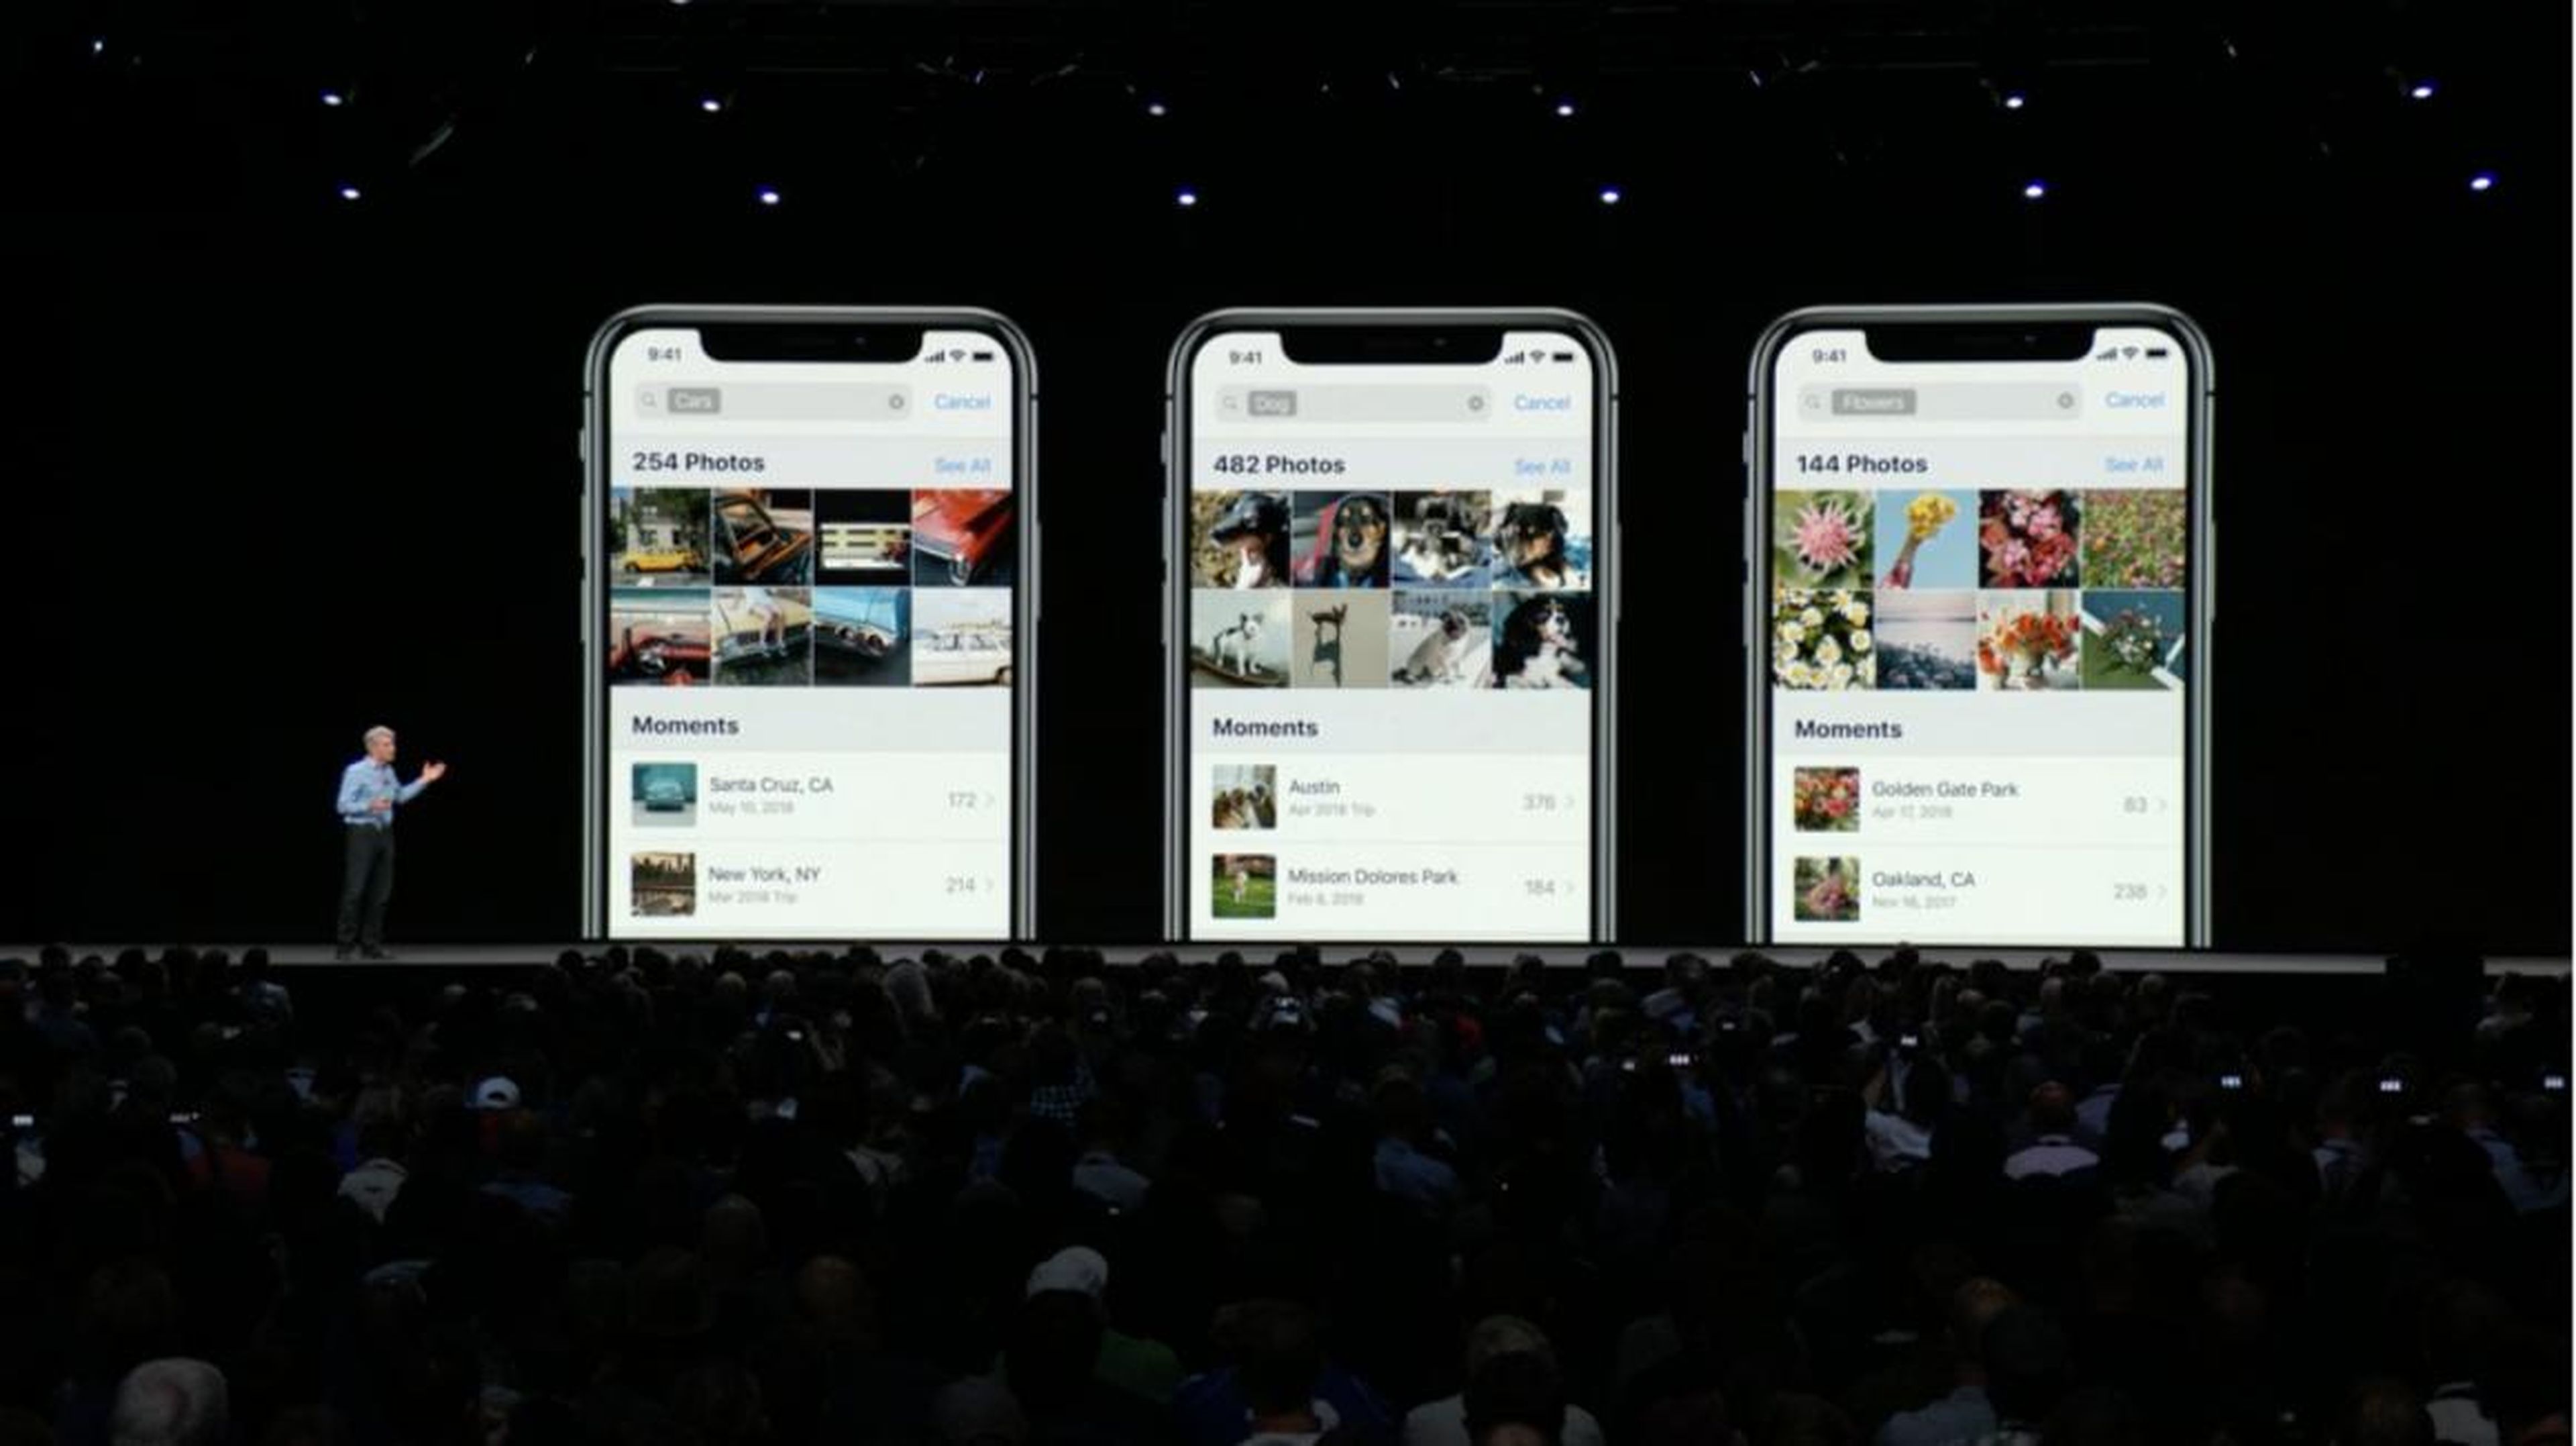 6. Apple's Photos app is getting a nice boost in iOS 12. A new "For You" tab lets you see photos you took that day in past years, or some Apple-made effects that could be applied to your photos. There are also new search